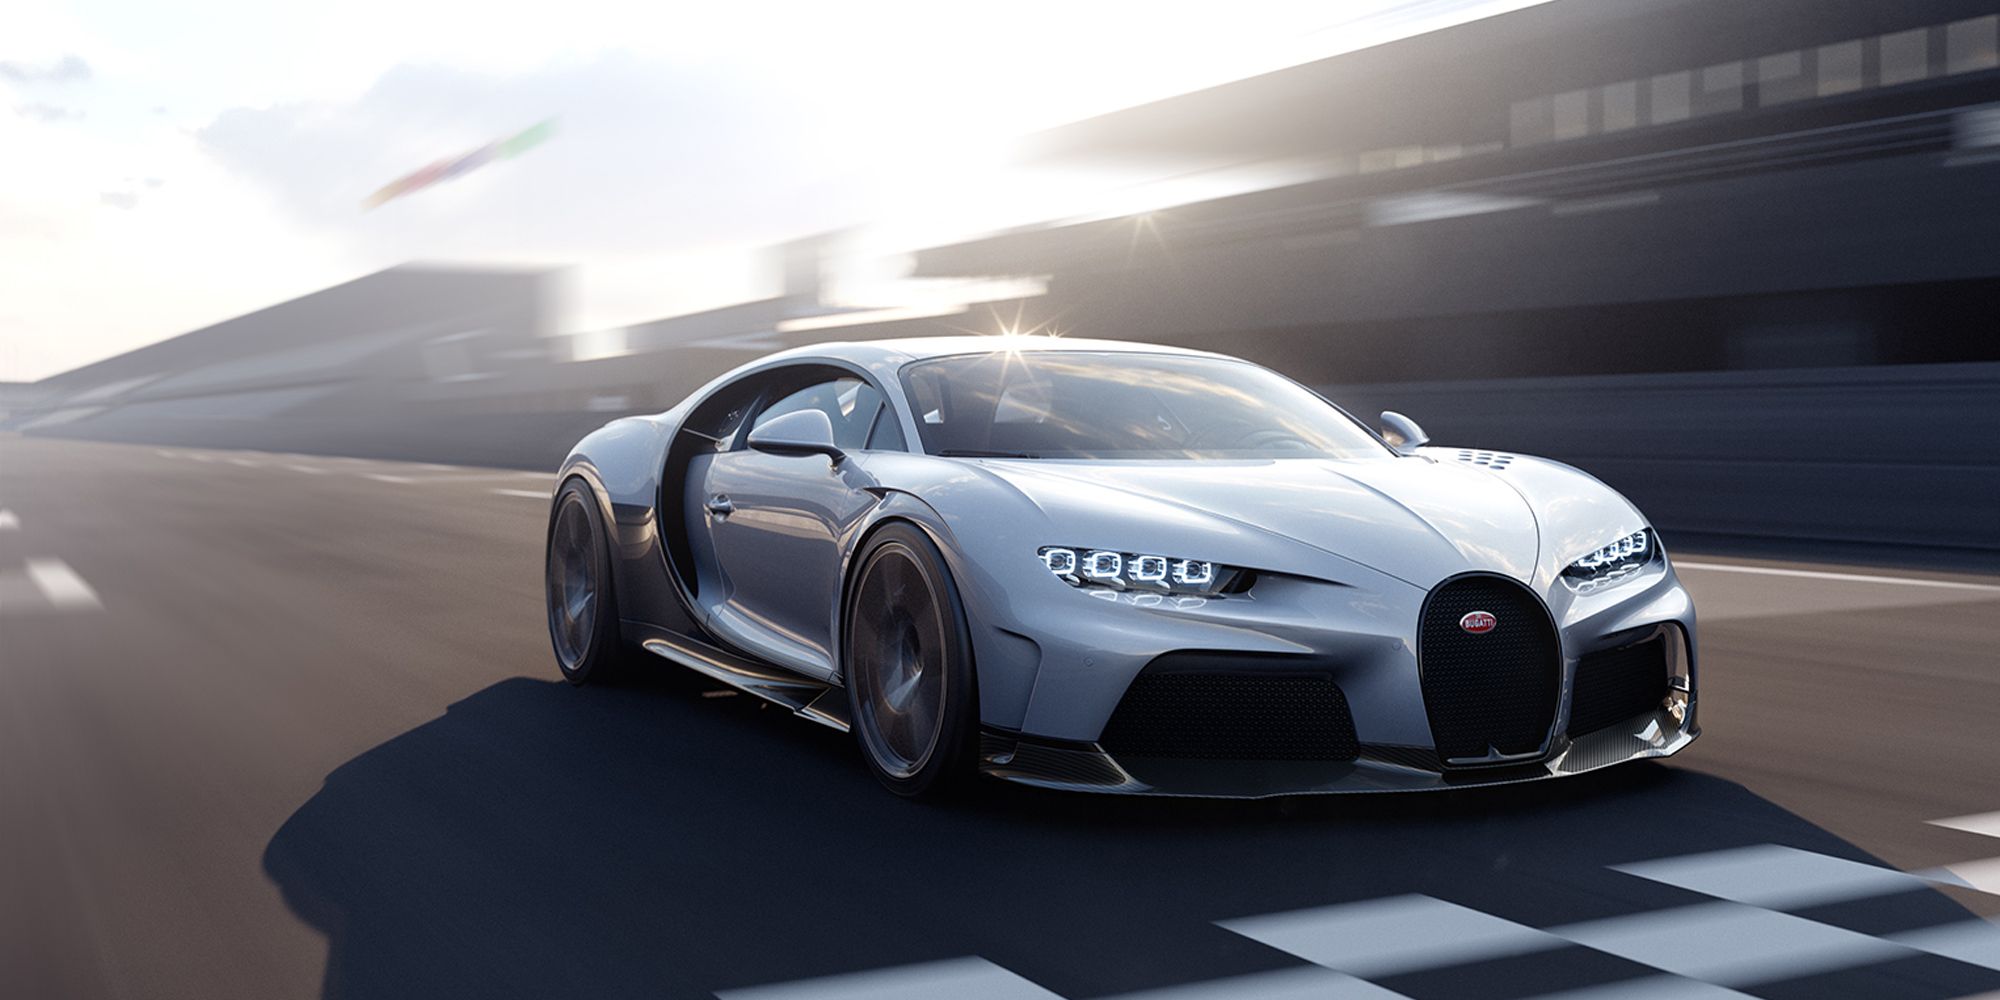 The Chiron Super Sport on track